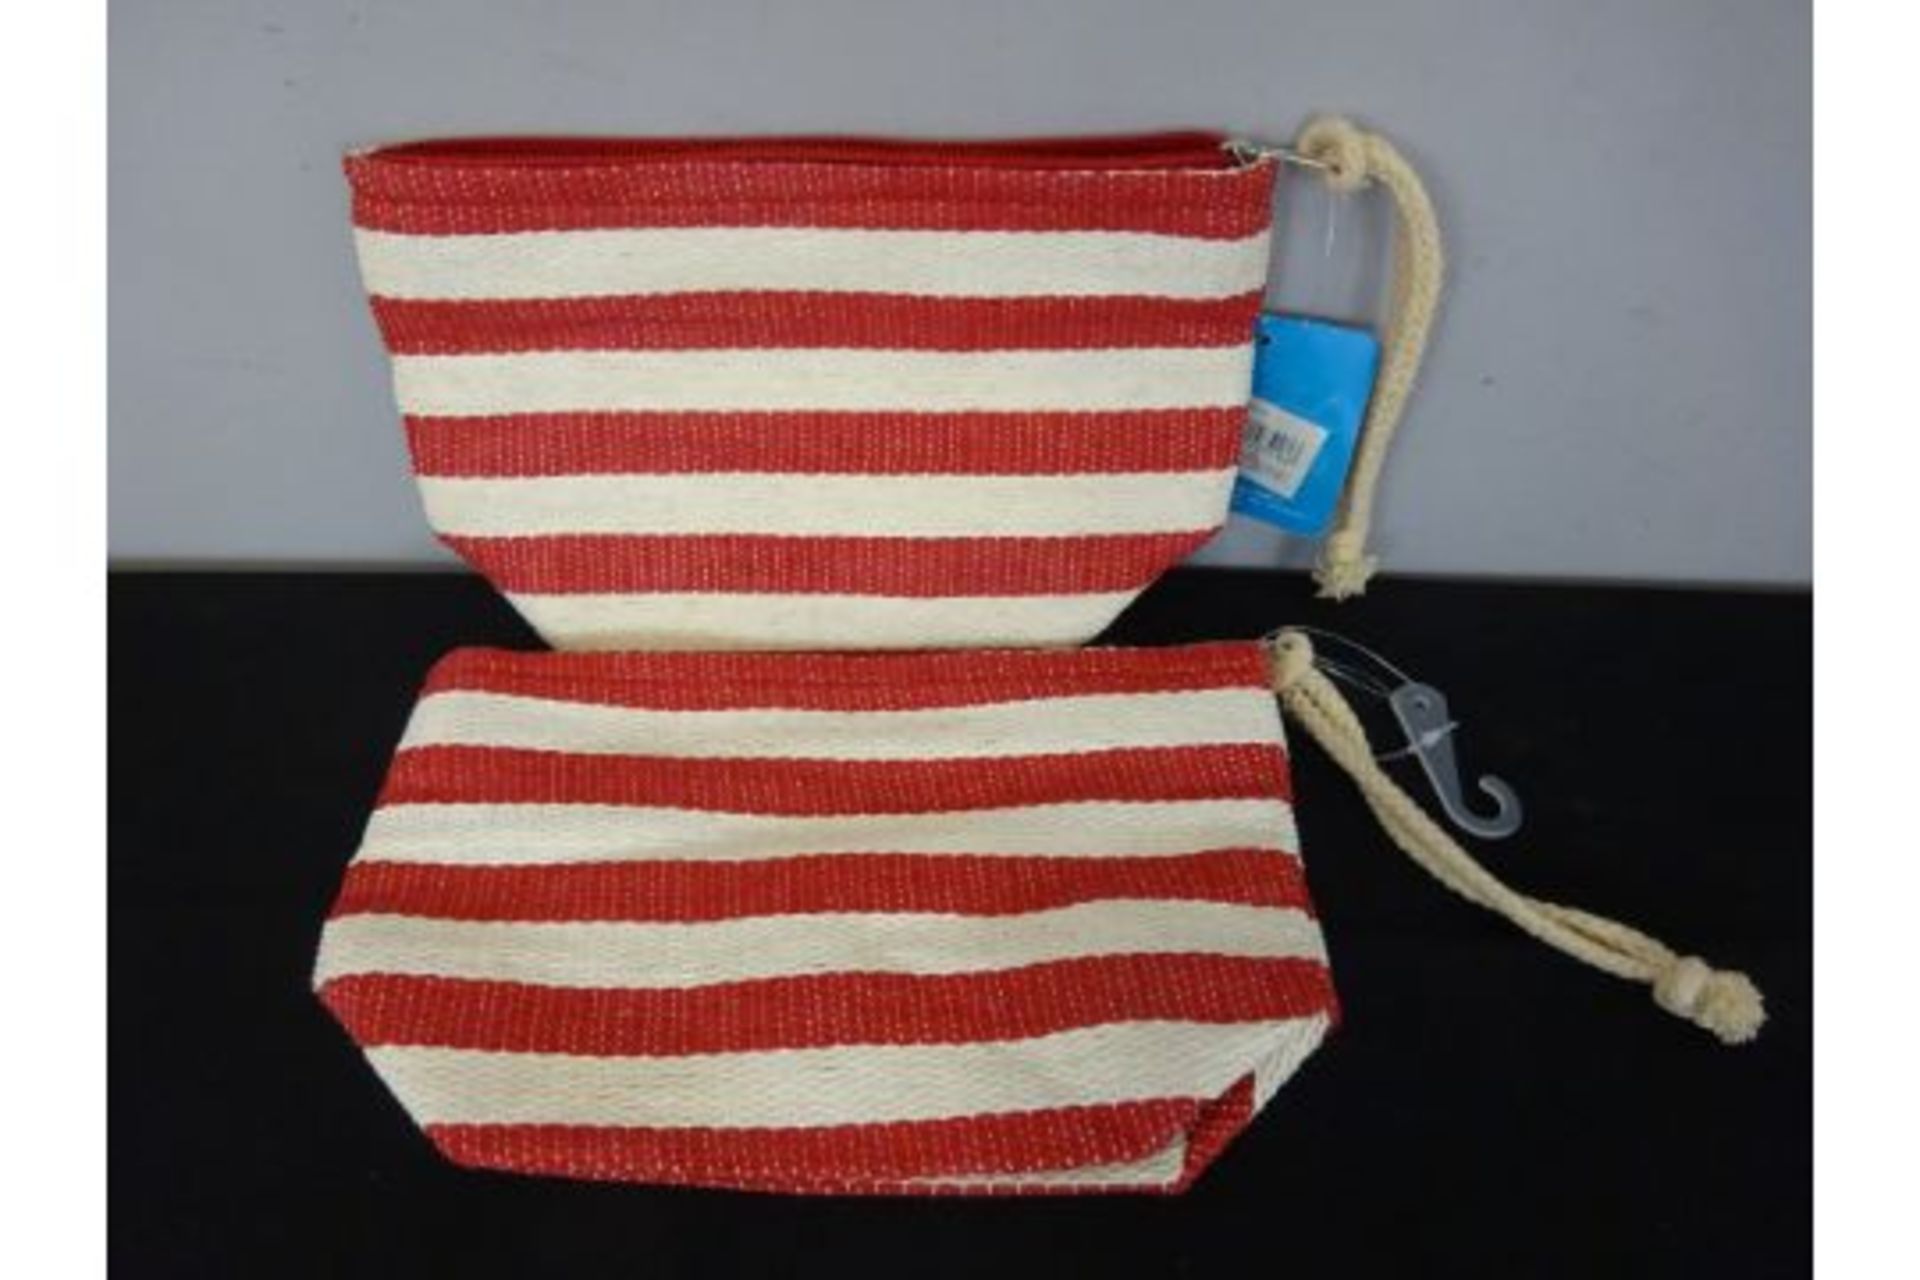 x2 New Red Striped Woven Cosmetic Bag